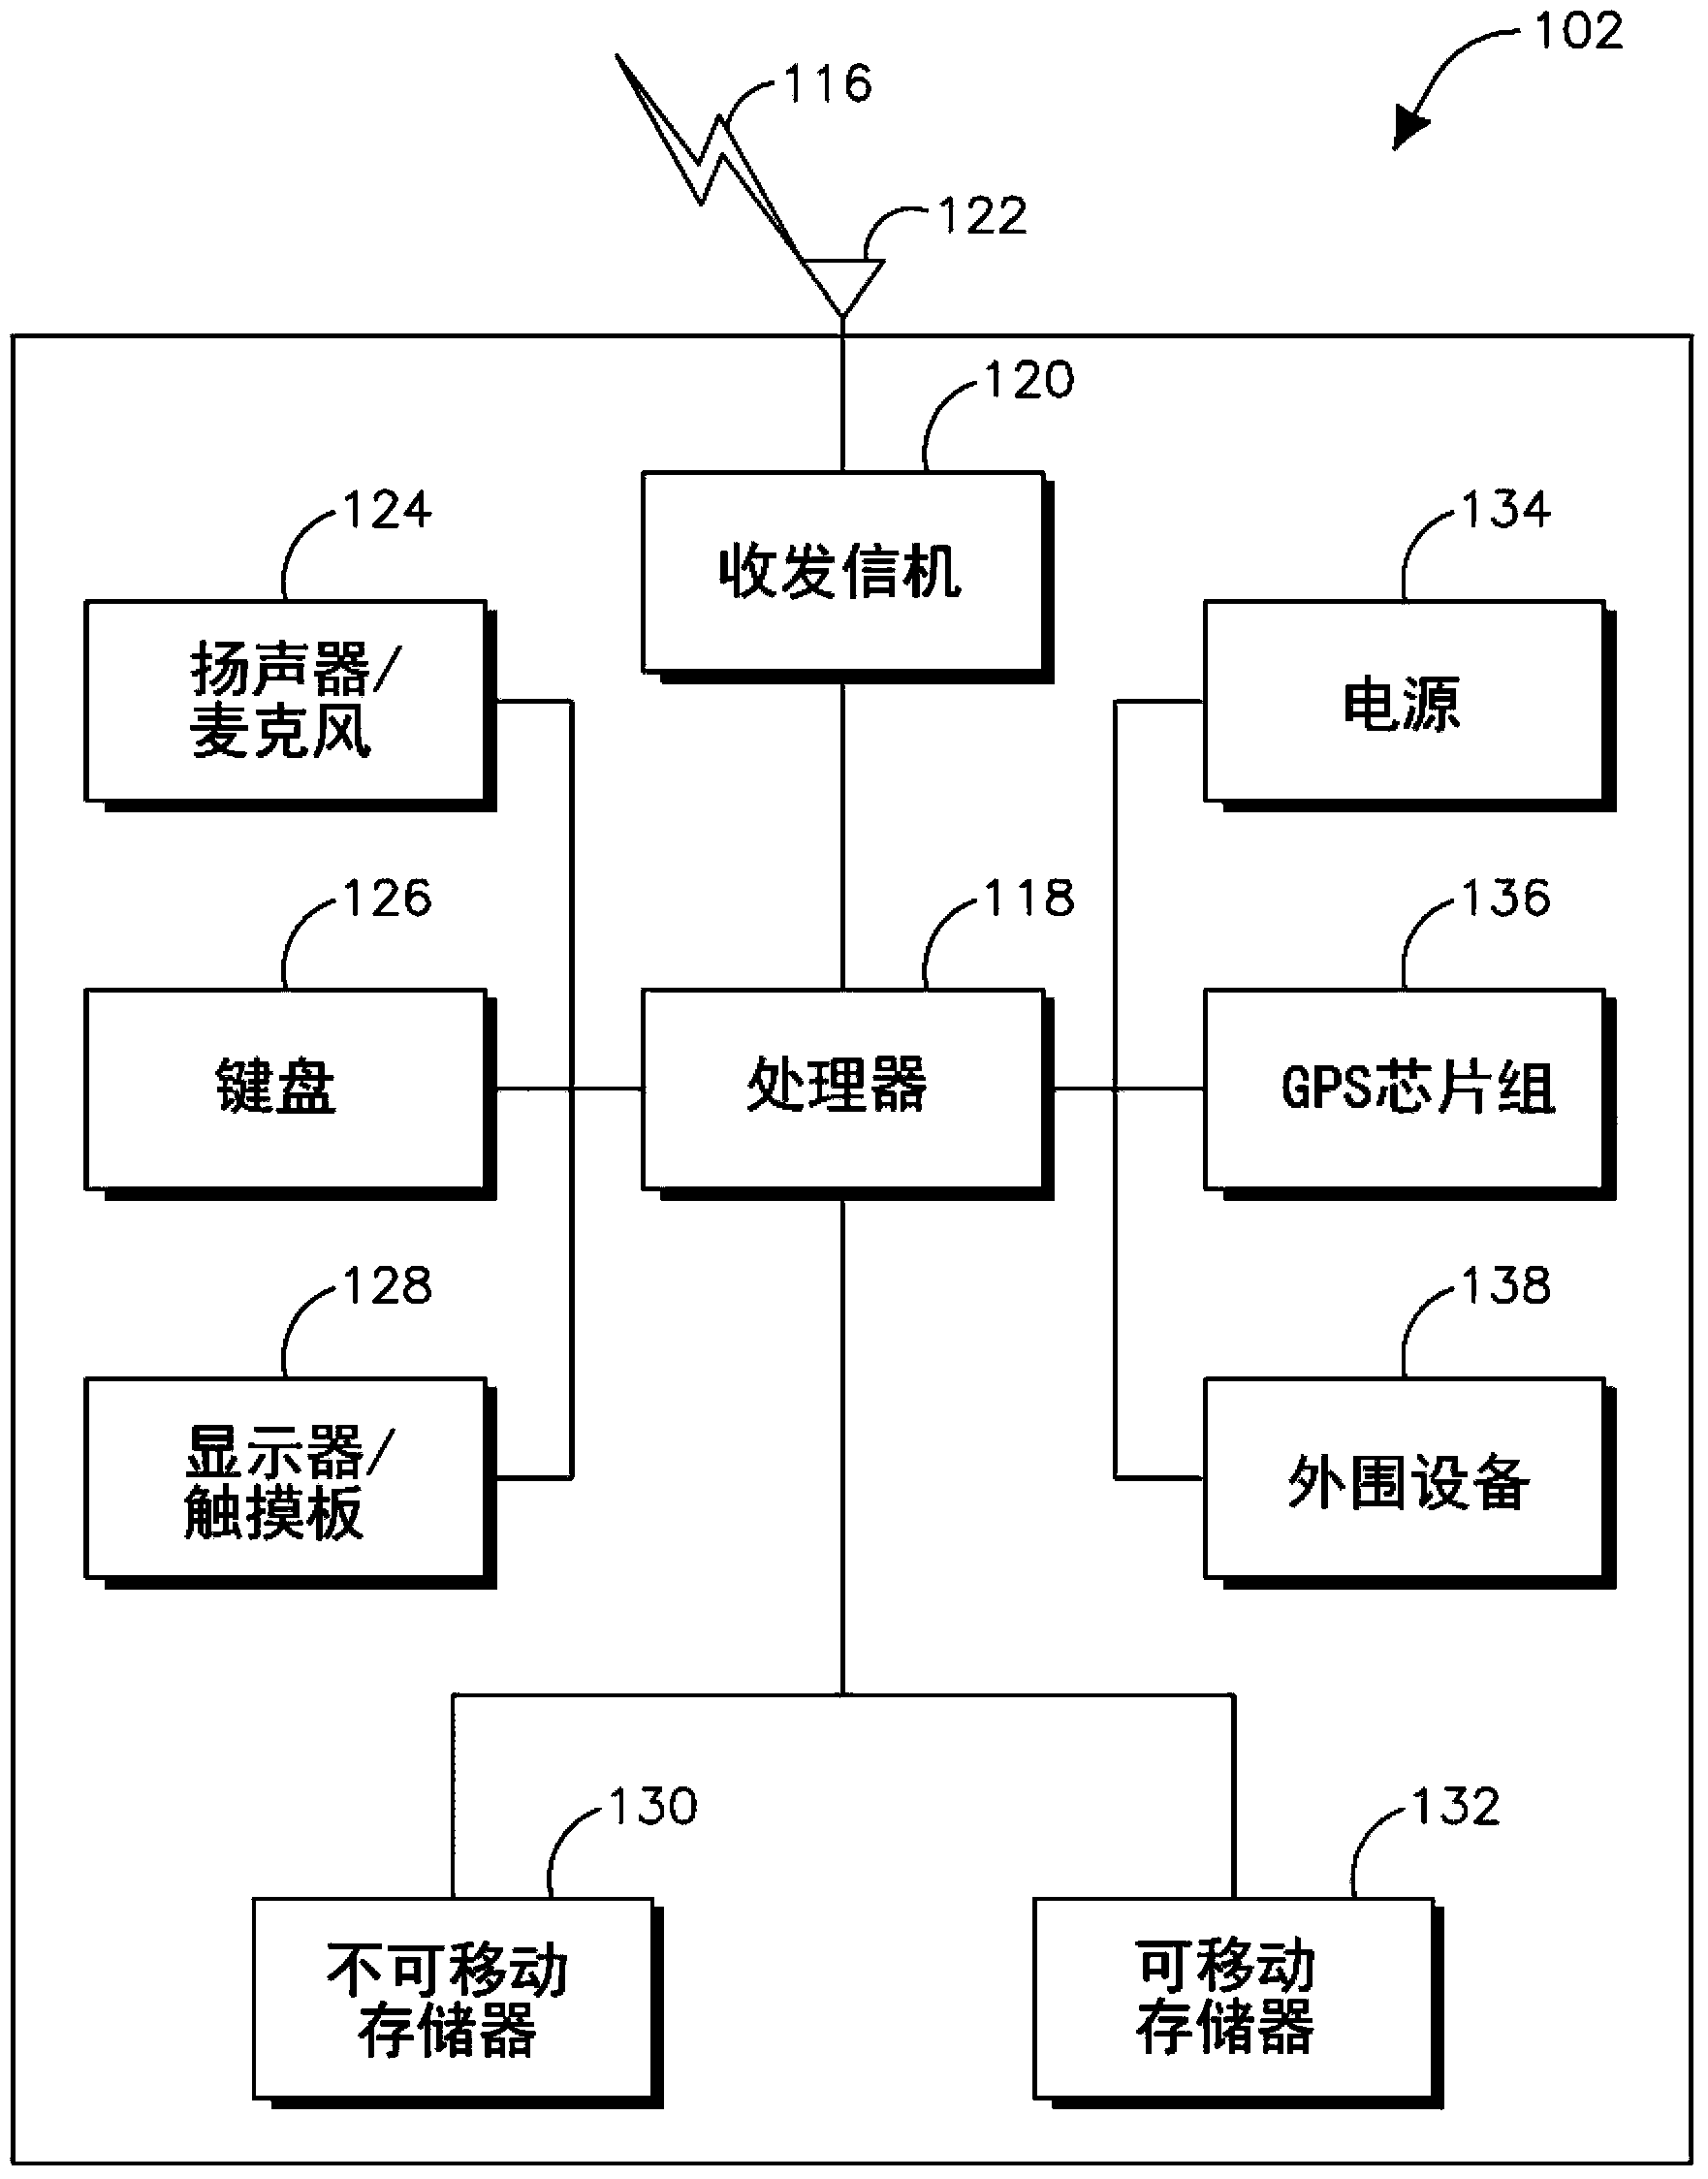 Method to enable wireless operation in license exempt spectrum